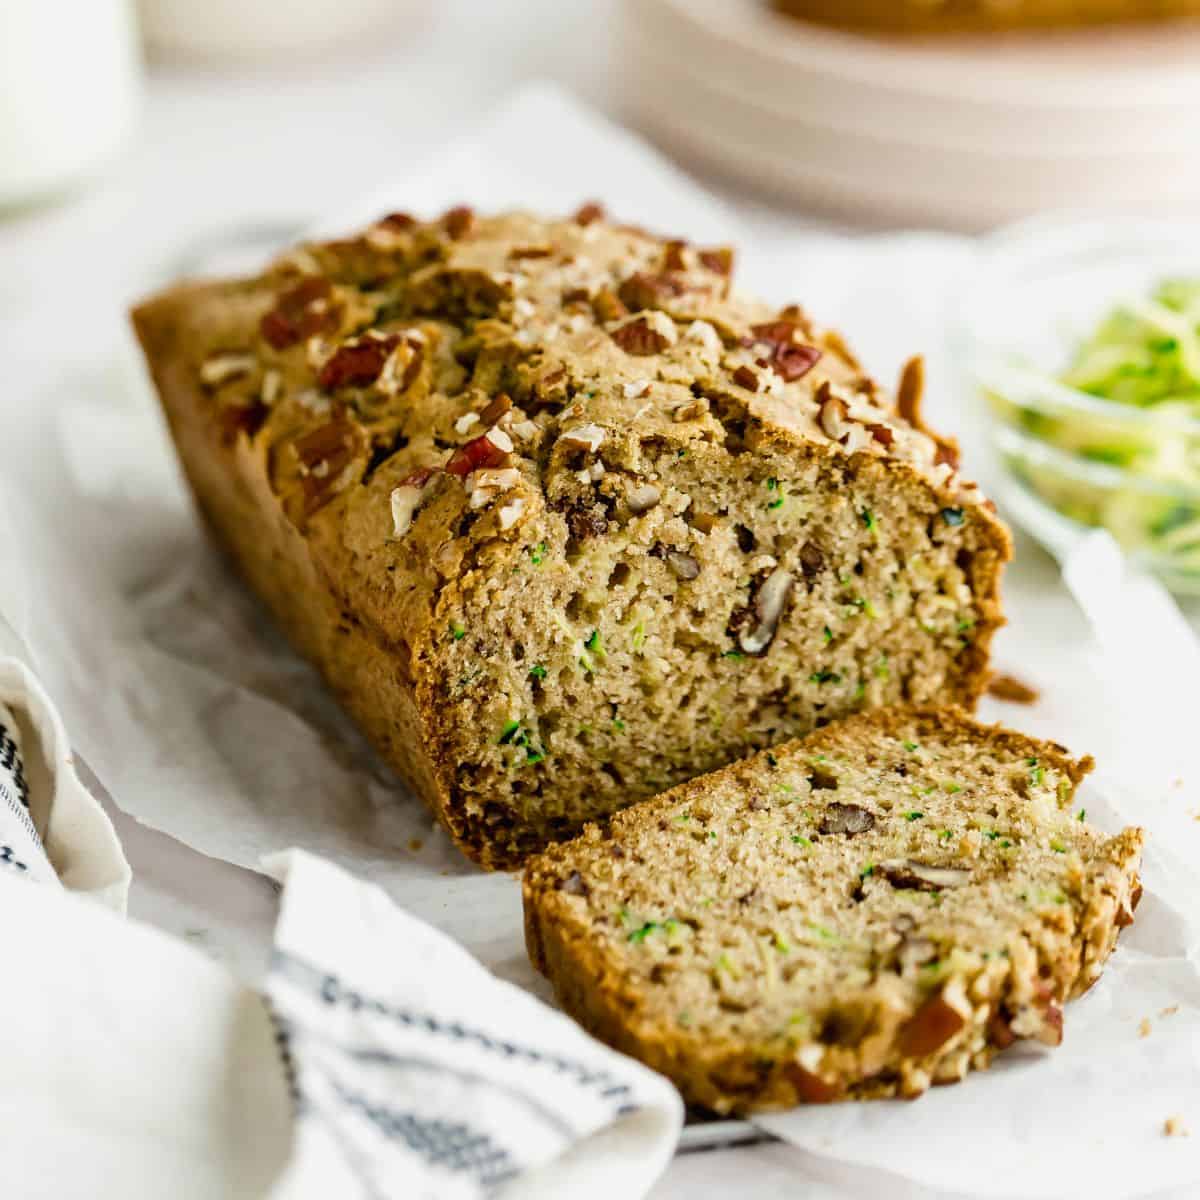 Sugar free homemade zucchini bread, a simple delicious and flavorful dessert, snack or breakfast recipe made with no added sugar. Low Carb GF option. Video 